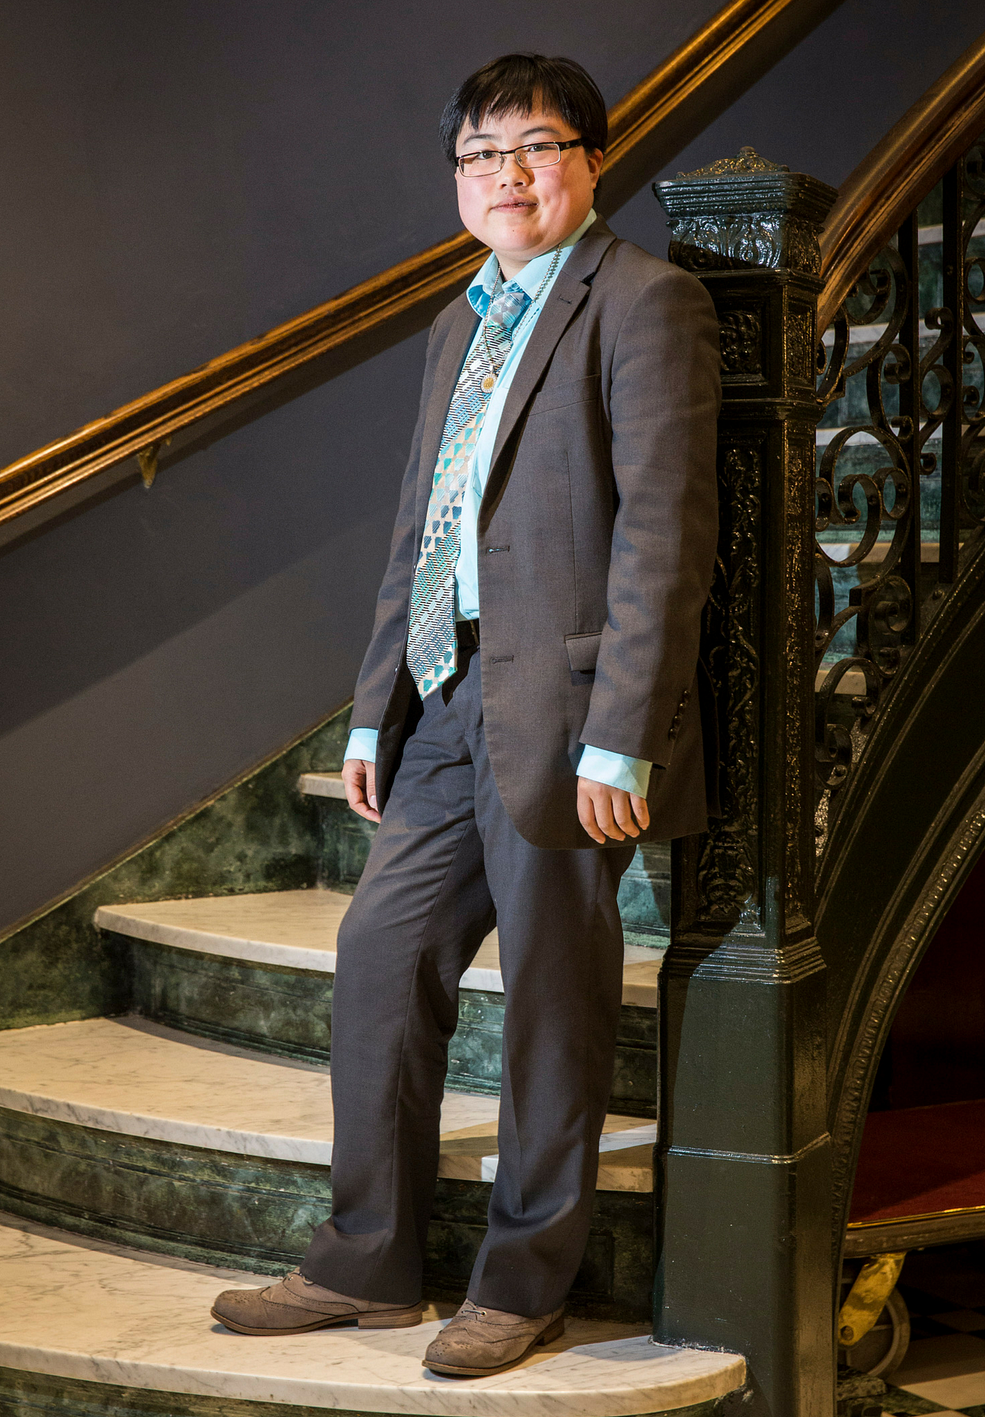 Photo: Lydia Brown, a young East Asian person with short black hair and glasses, standing against a wrought-iron banister and marble staircase in a darkly painted room. Lydia has a serious expression and is wearing a gray suit with teal shirt and tie.